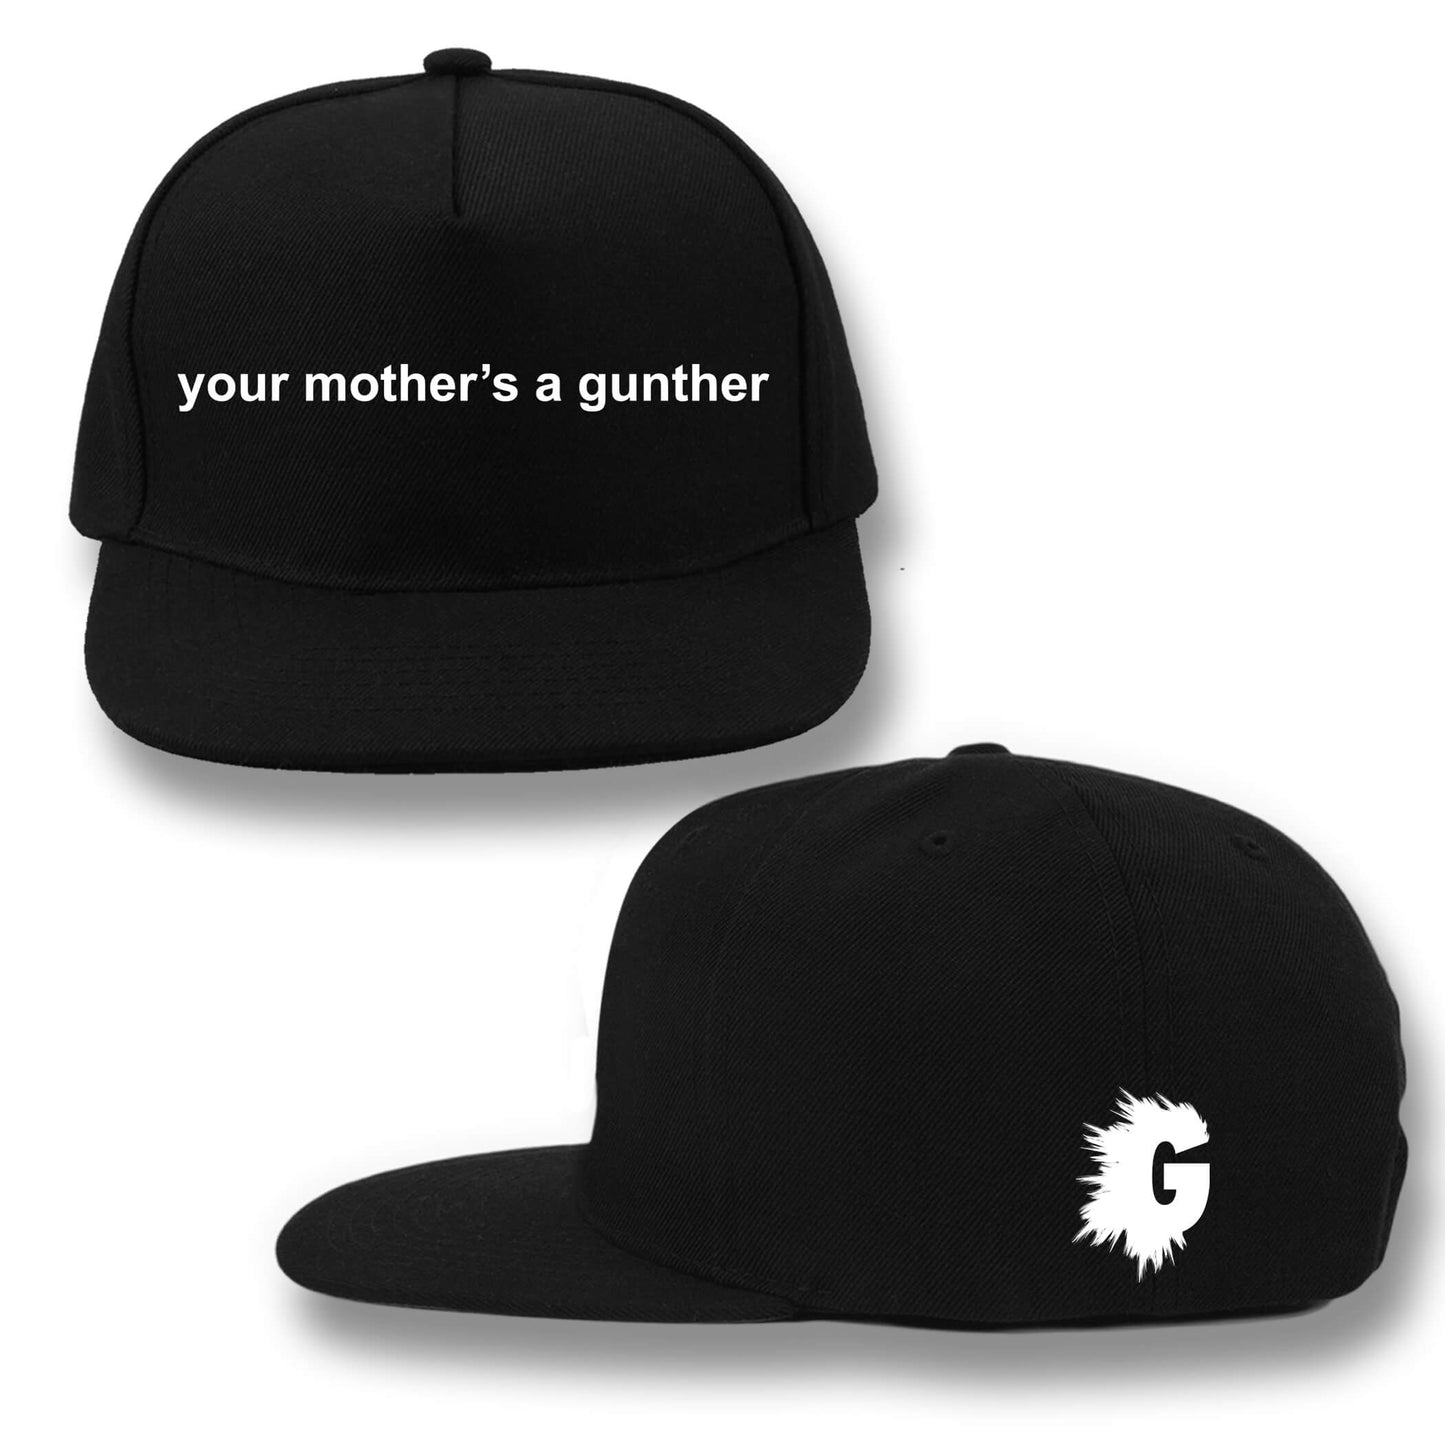 YOUR MOTHER'S A GUNTHER SNAPBACK